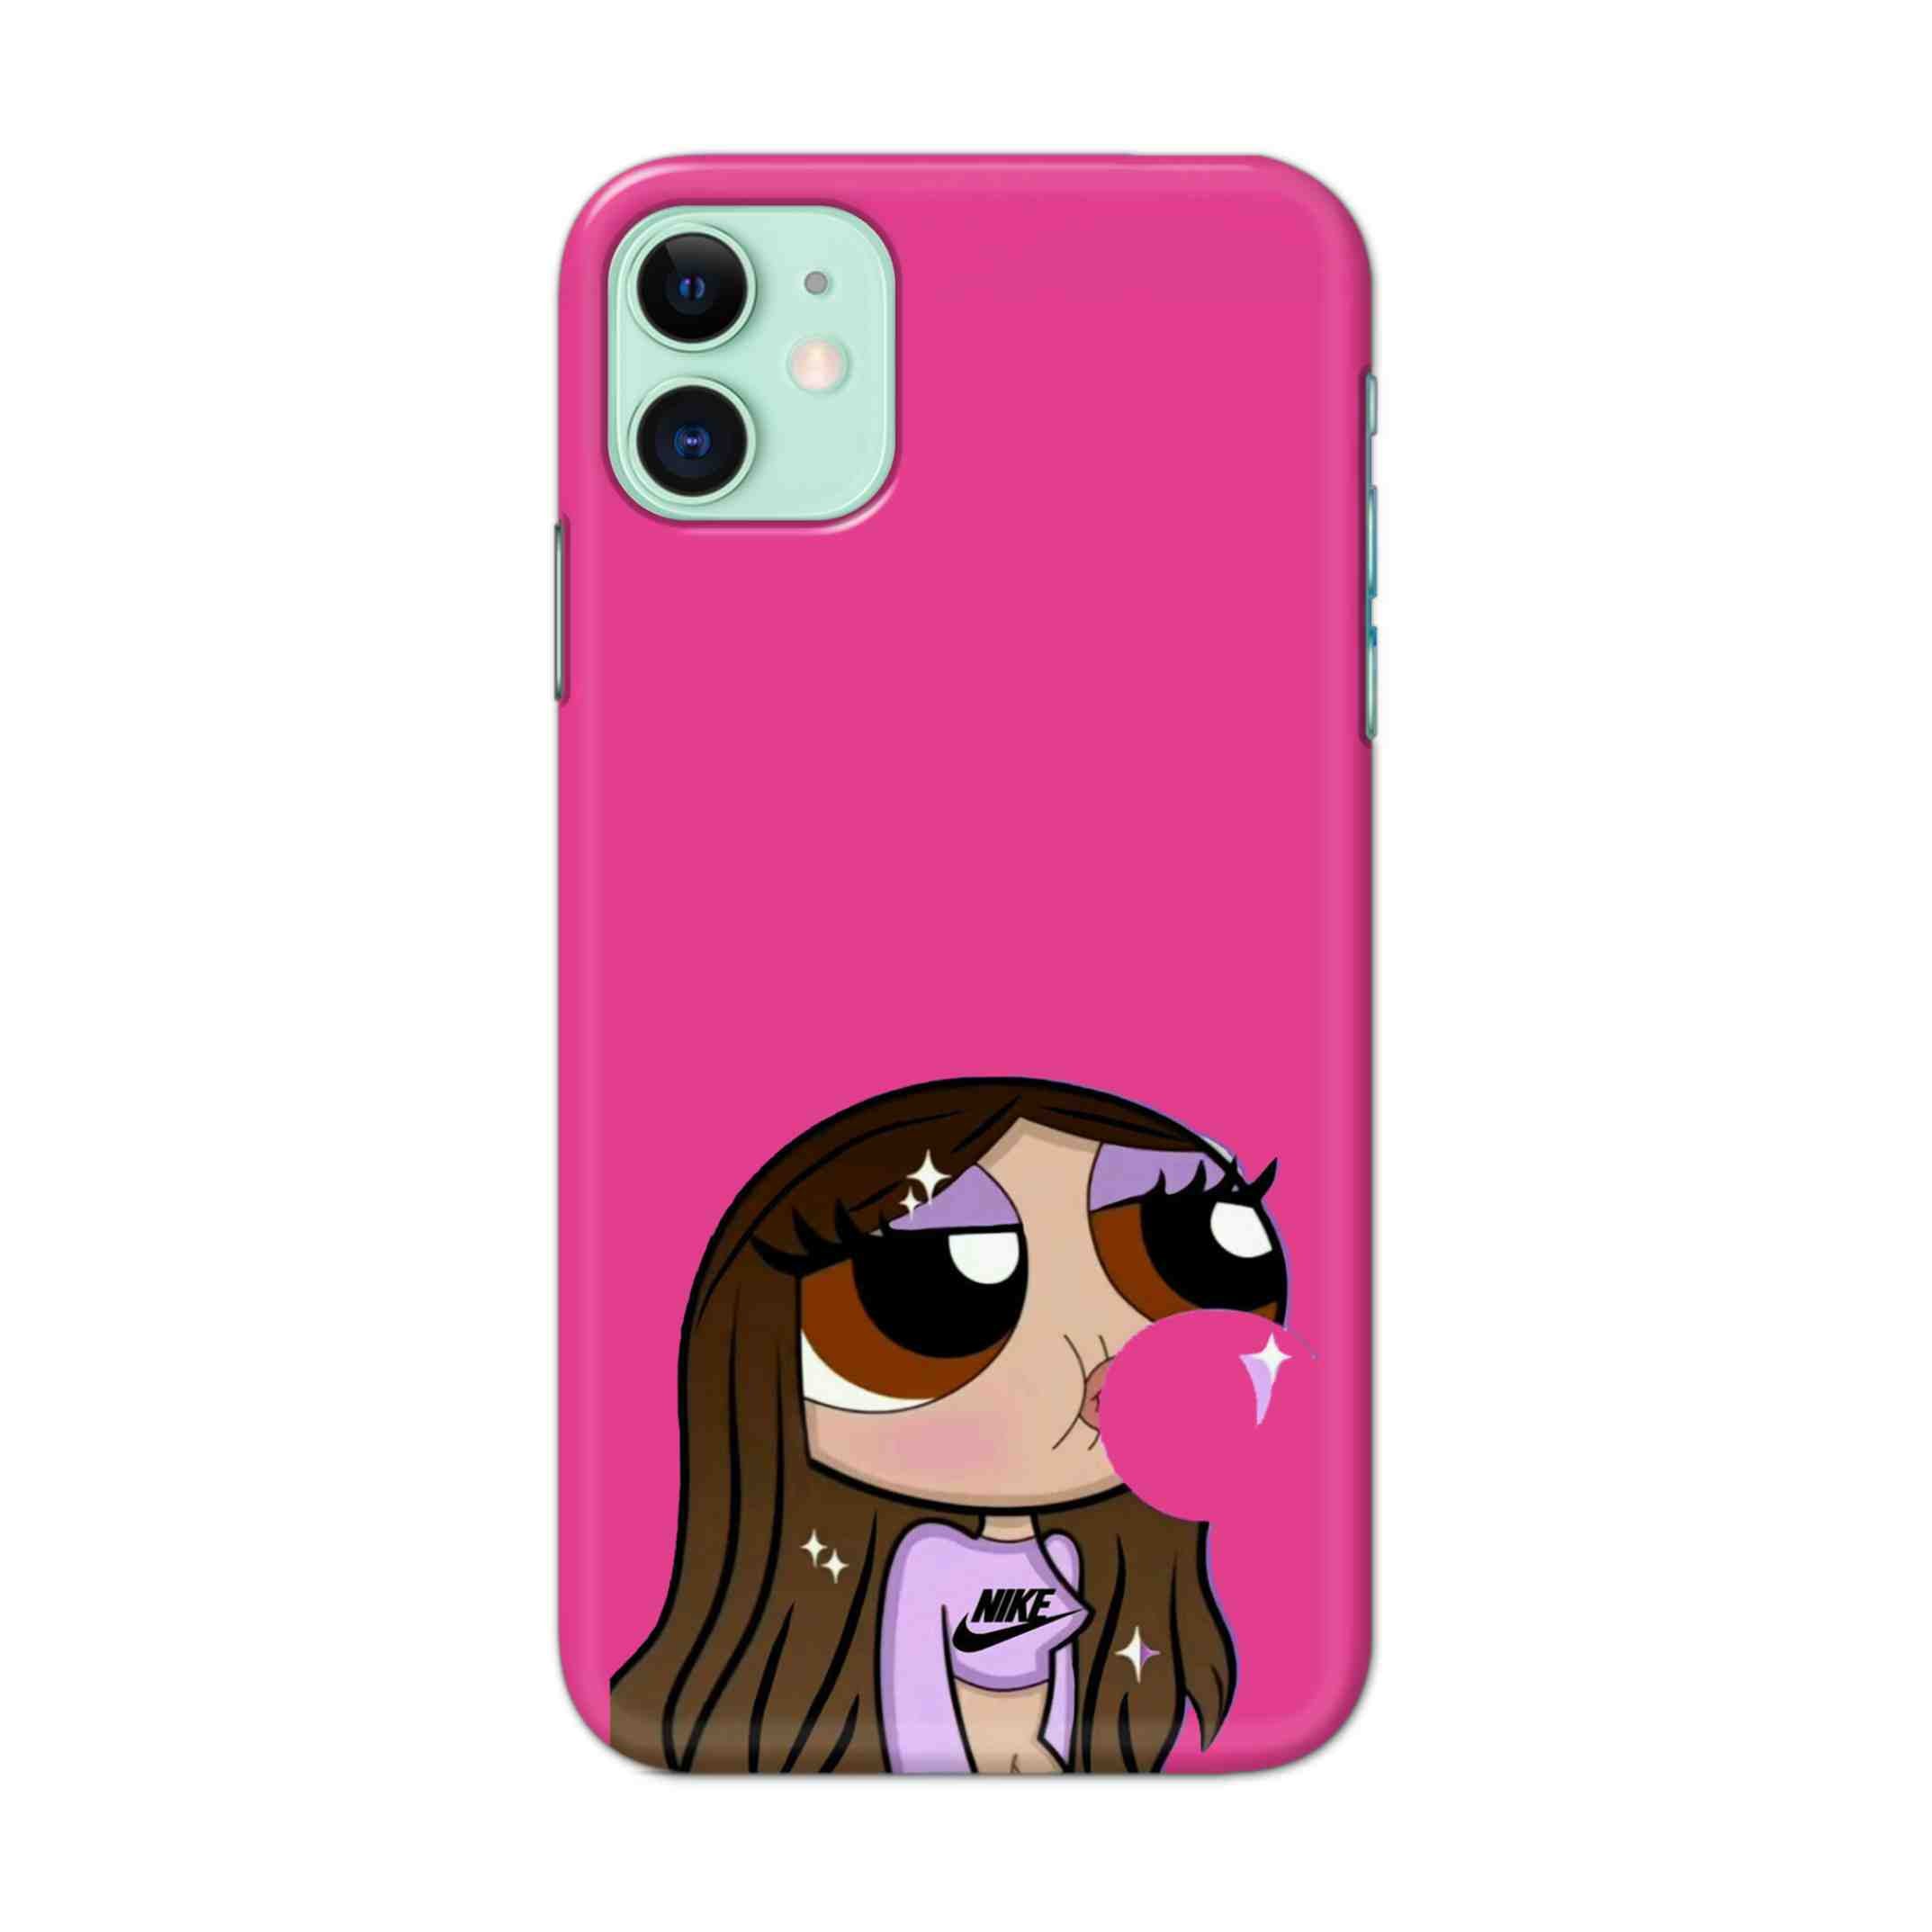 Buy Bubble Girl Hard Back Mobile Phone Case/Cover For iPhone 11 Online